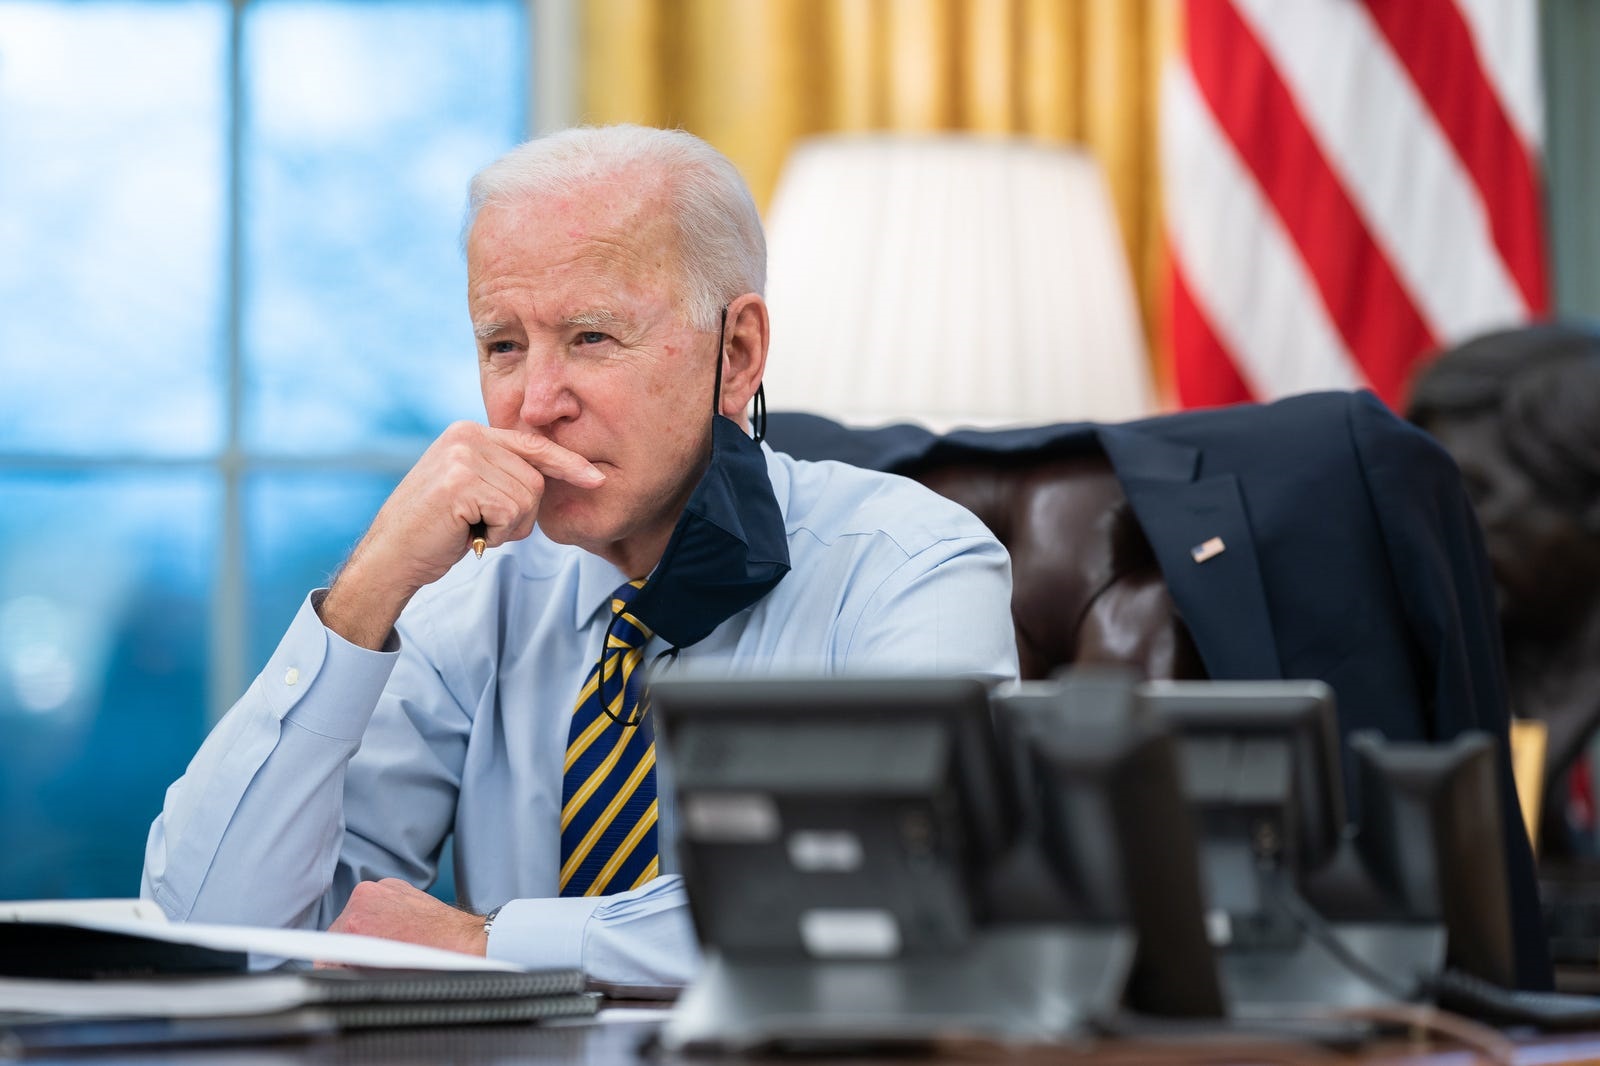 biden-police-reform-pledge-faces-limits-of-presidential-power-news24